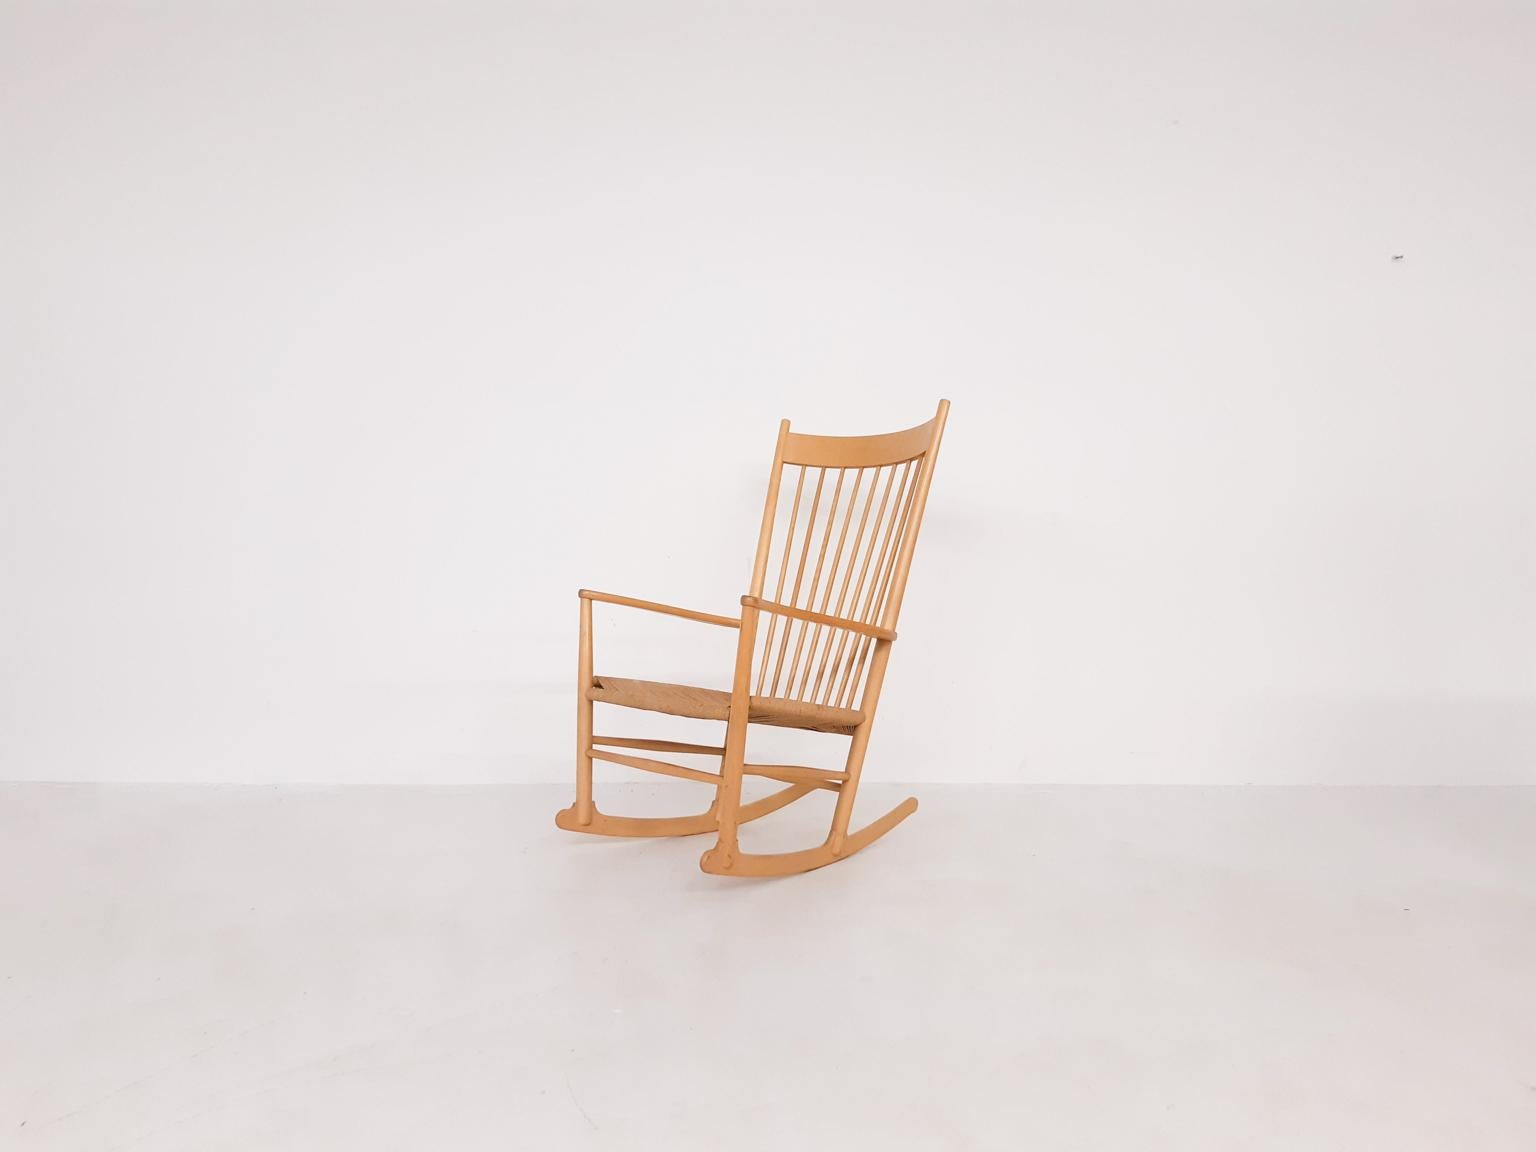 Natural oak rocking chair with papercord seating. Designed in 1944 by Hans Wegner with the help of Borge Mogensen.

This model was produced by Fredericia.